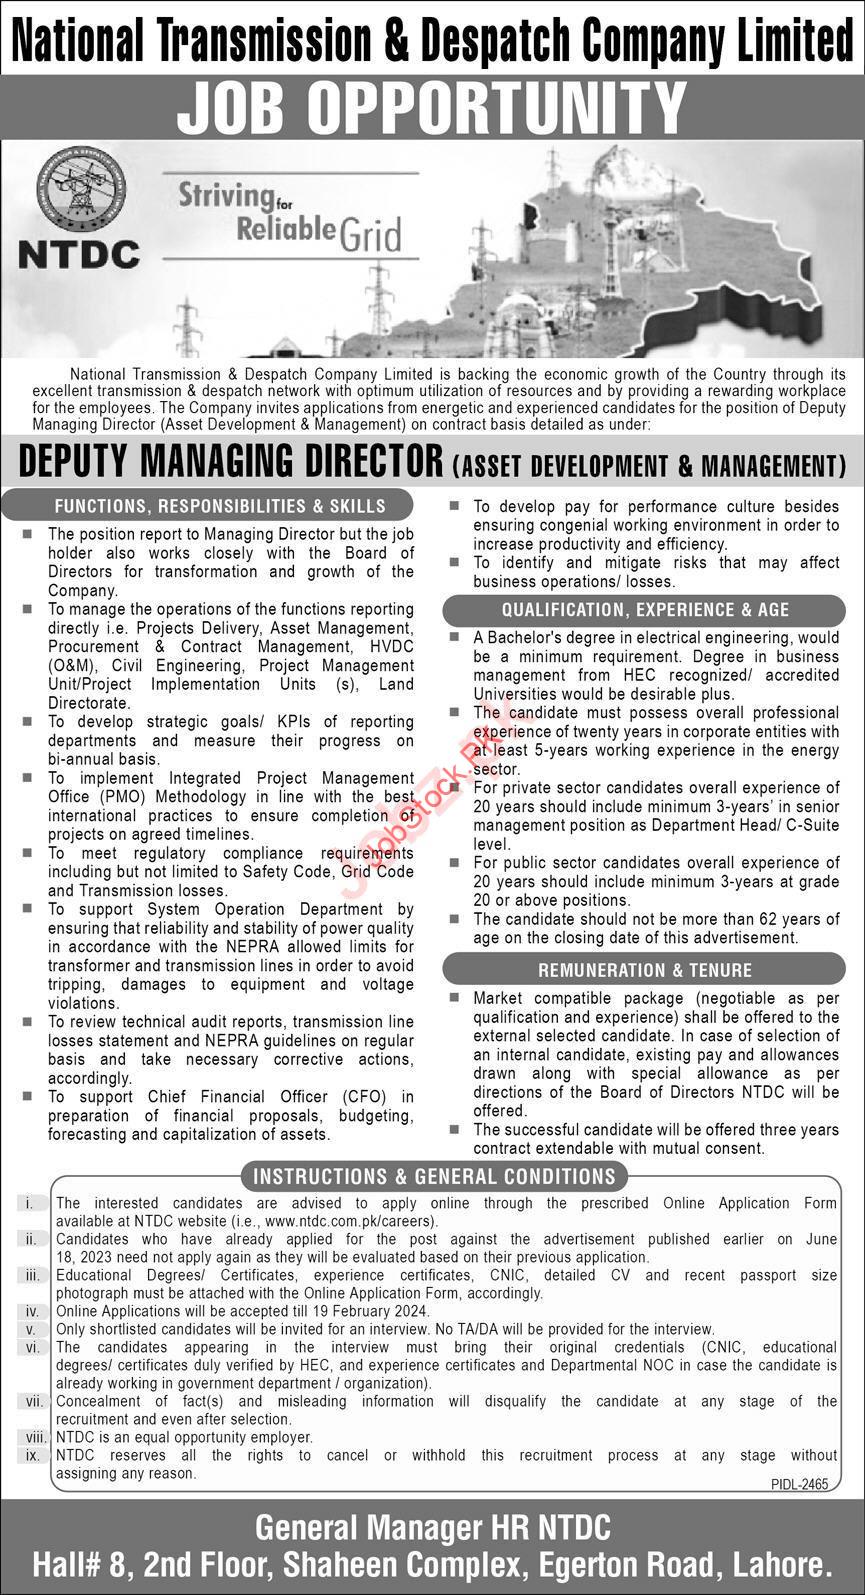 Job Announcement at National Transmission & Despatch Company